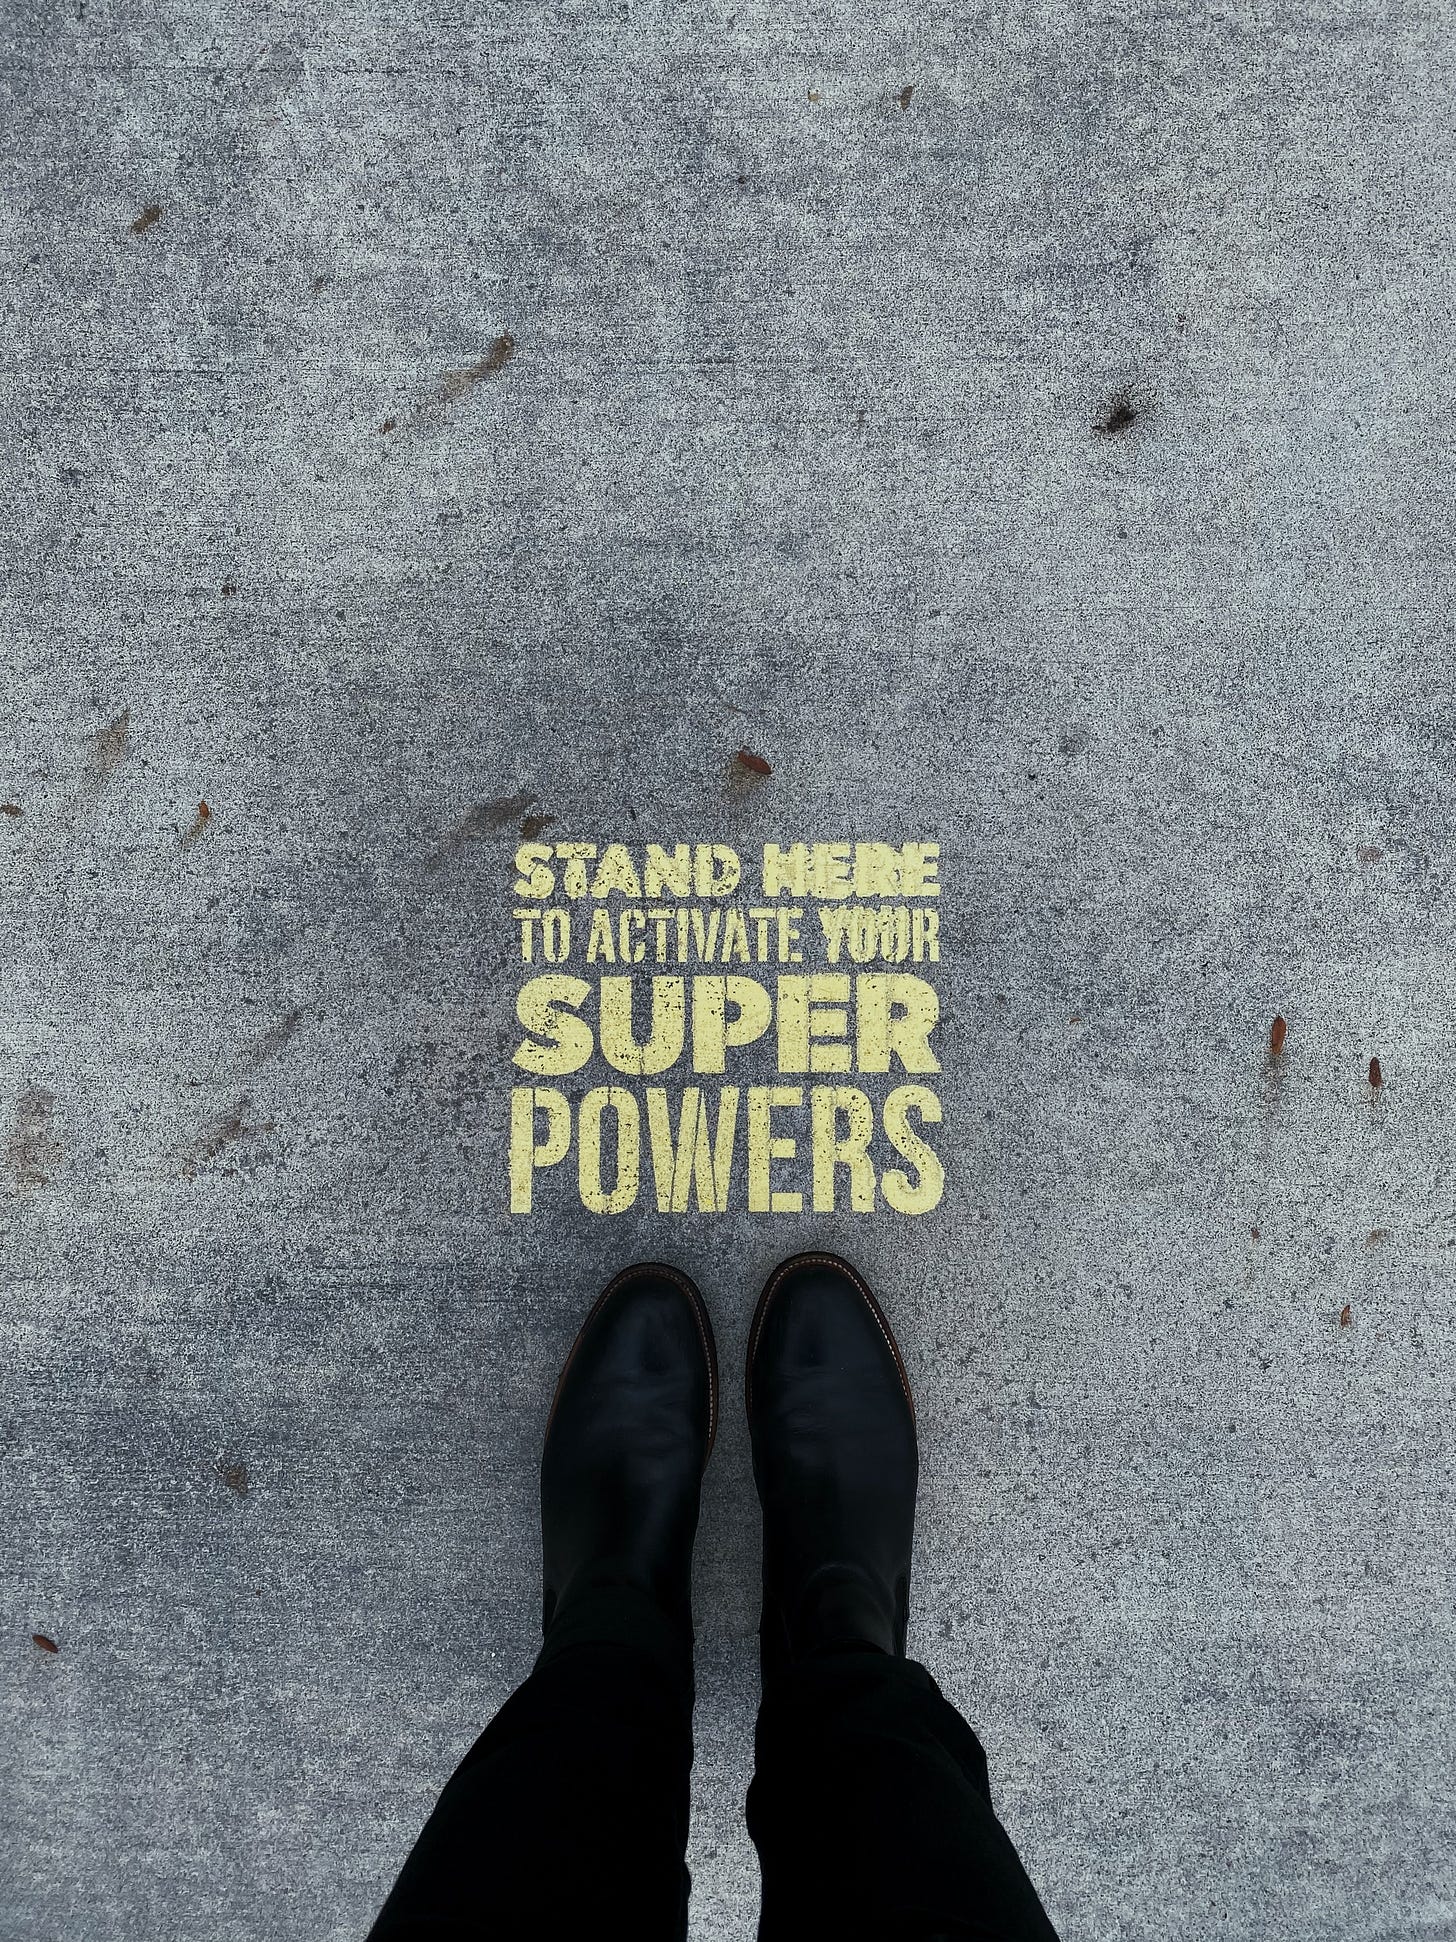 Looking down on feet in black boots on gray pavement with gold letters that say "Stand Here to Activate Your Super Powers!"